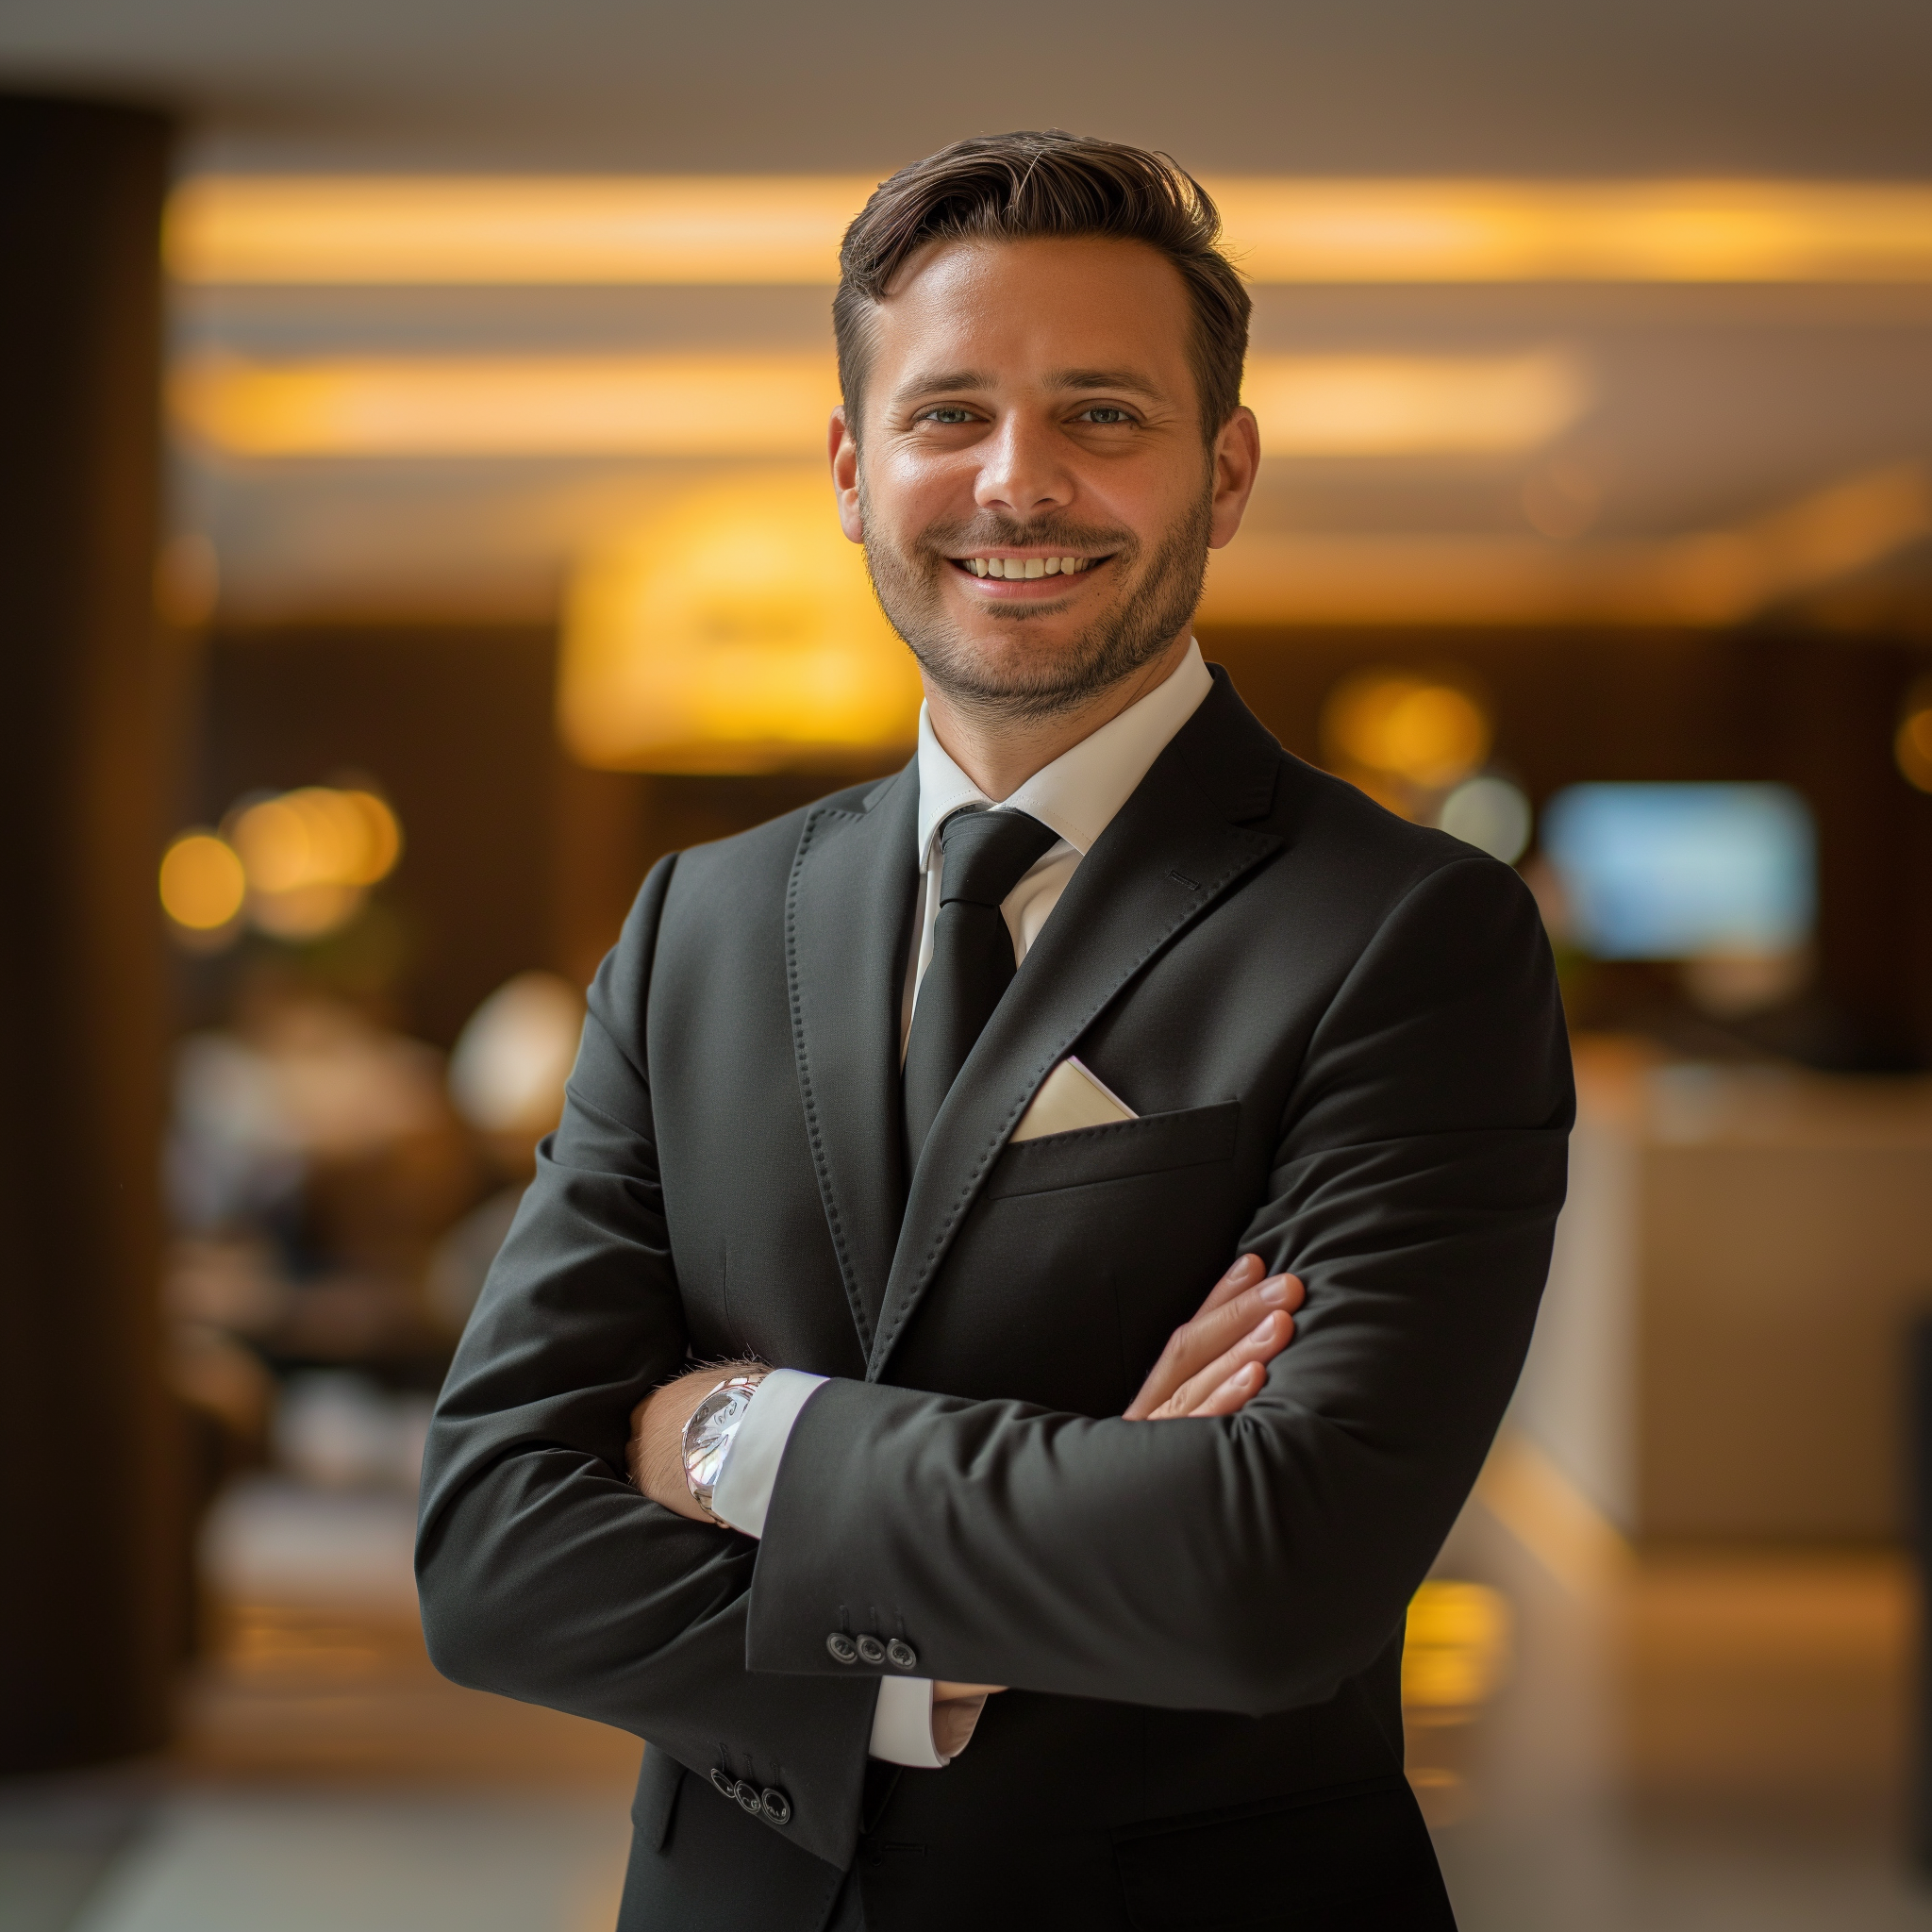 A smiling hotel manager | Source: Midjourney